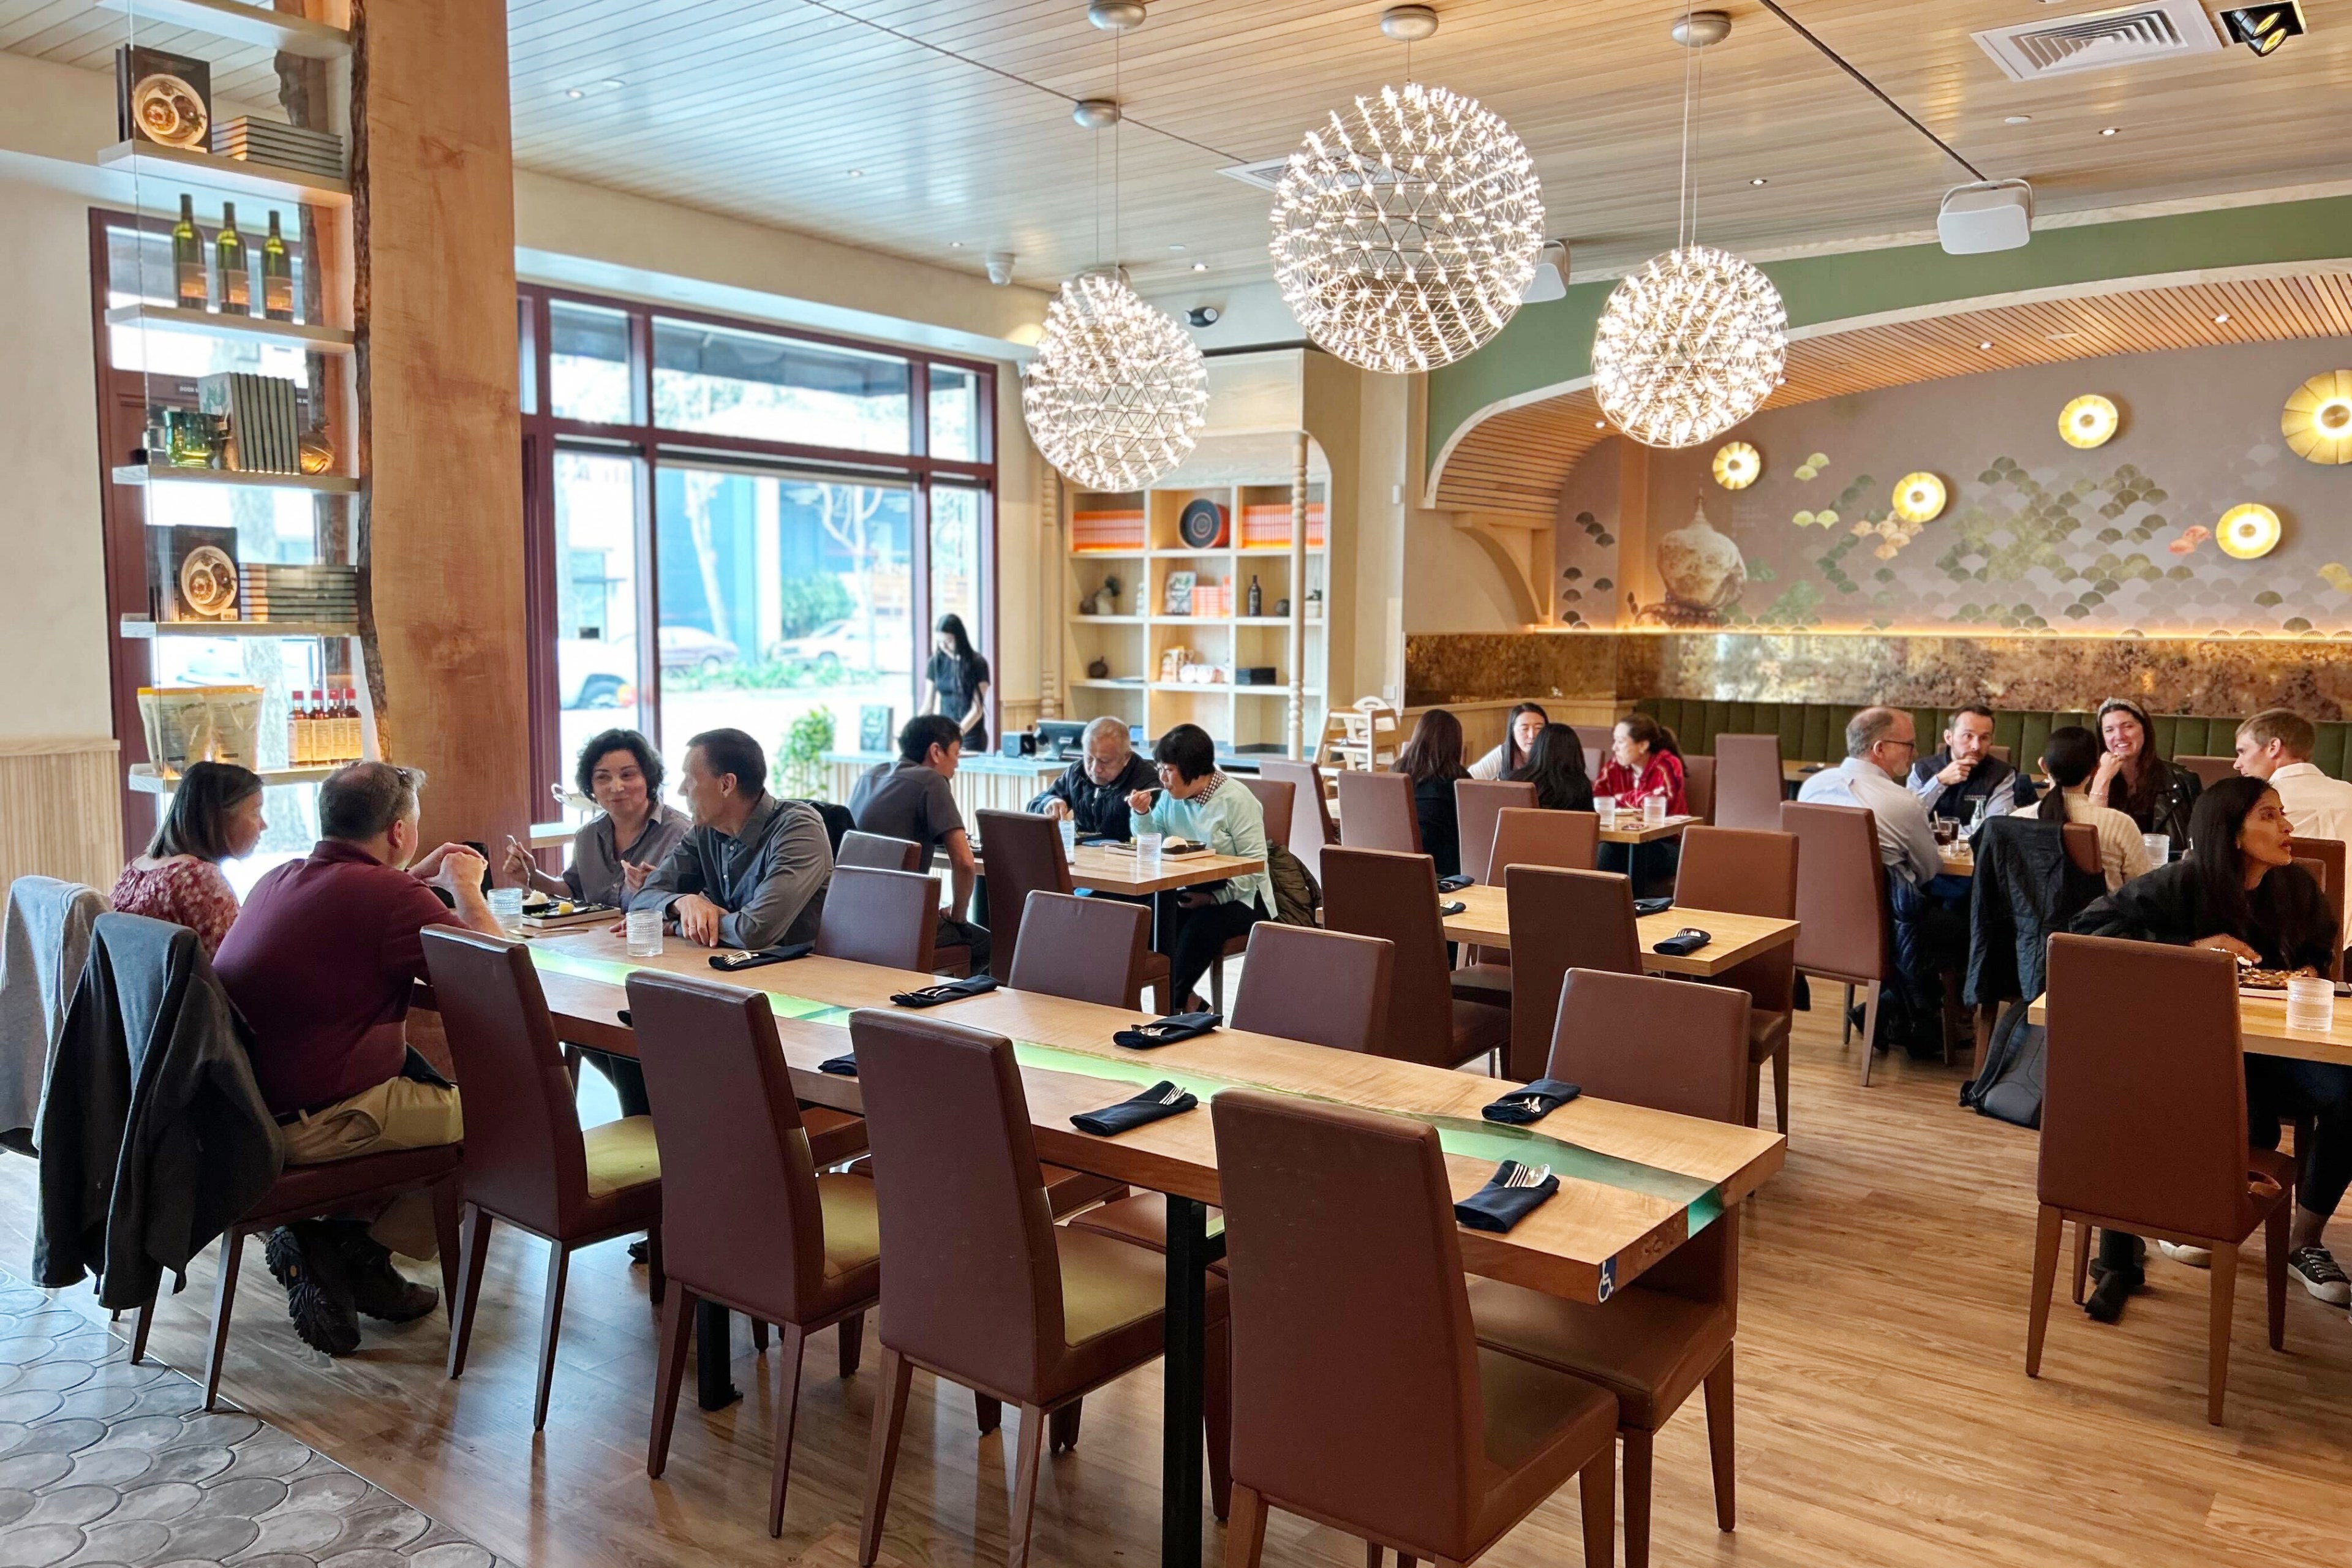 A busy restaurant interior with diners at tables and modern decor, including spherical chandeliers.